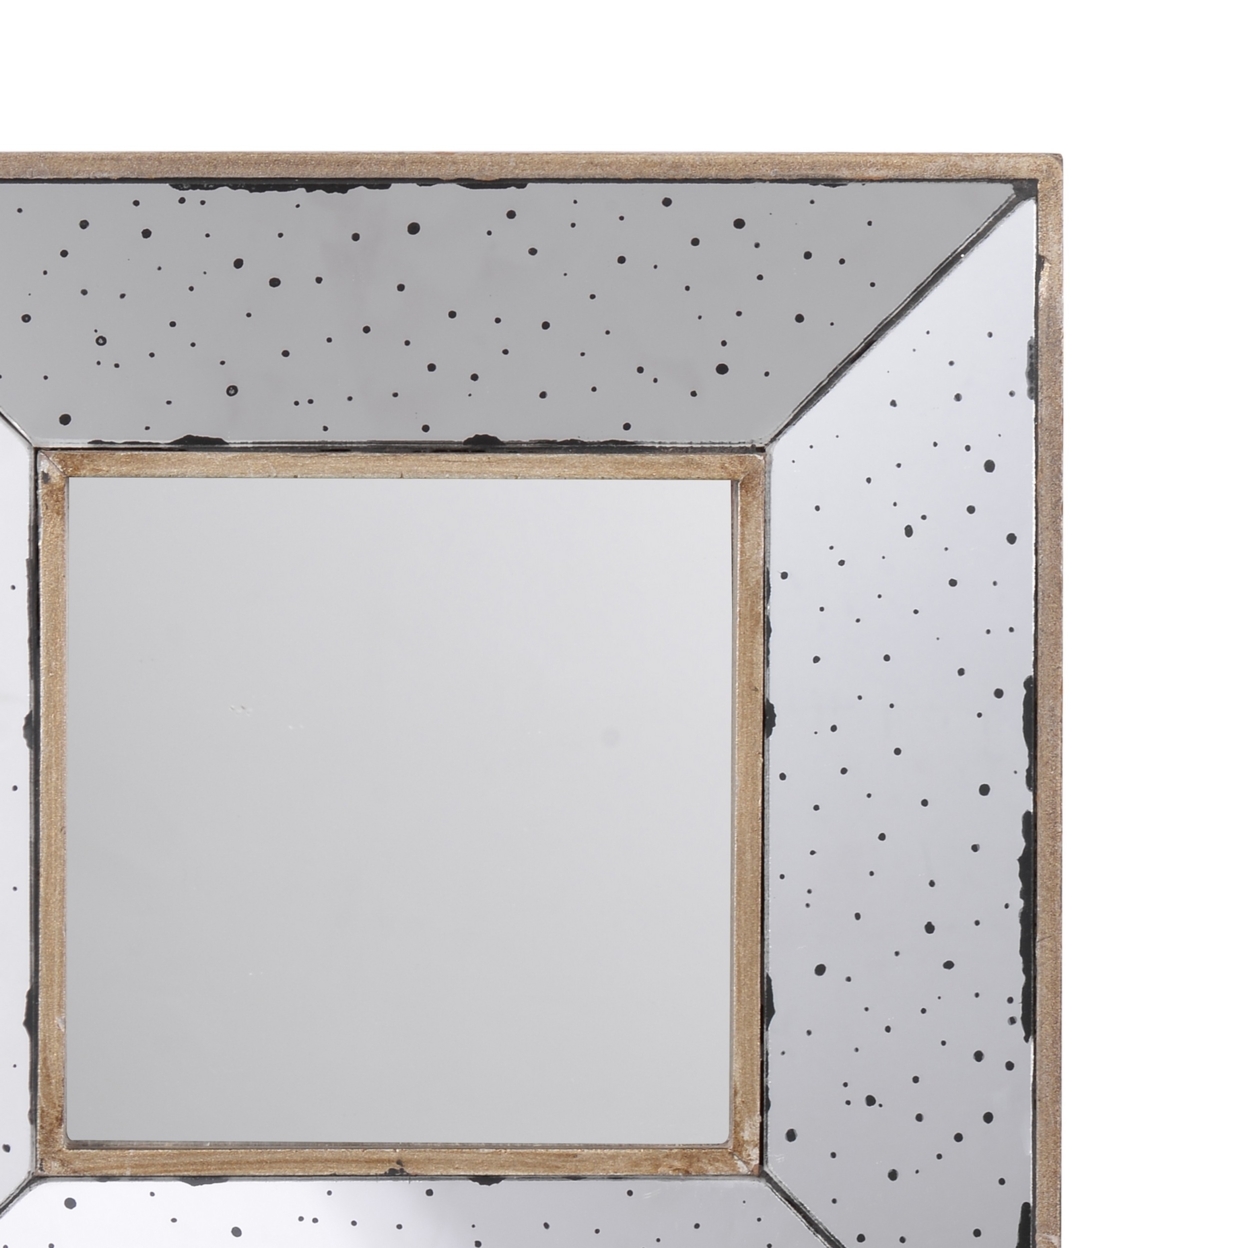 Joe 12 Inch Square Wall Mirror, 3 Dimensional, Speckled Off White And Brown- Saltoro Sherpi